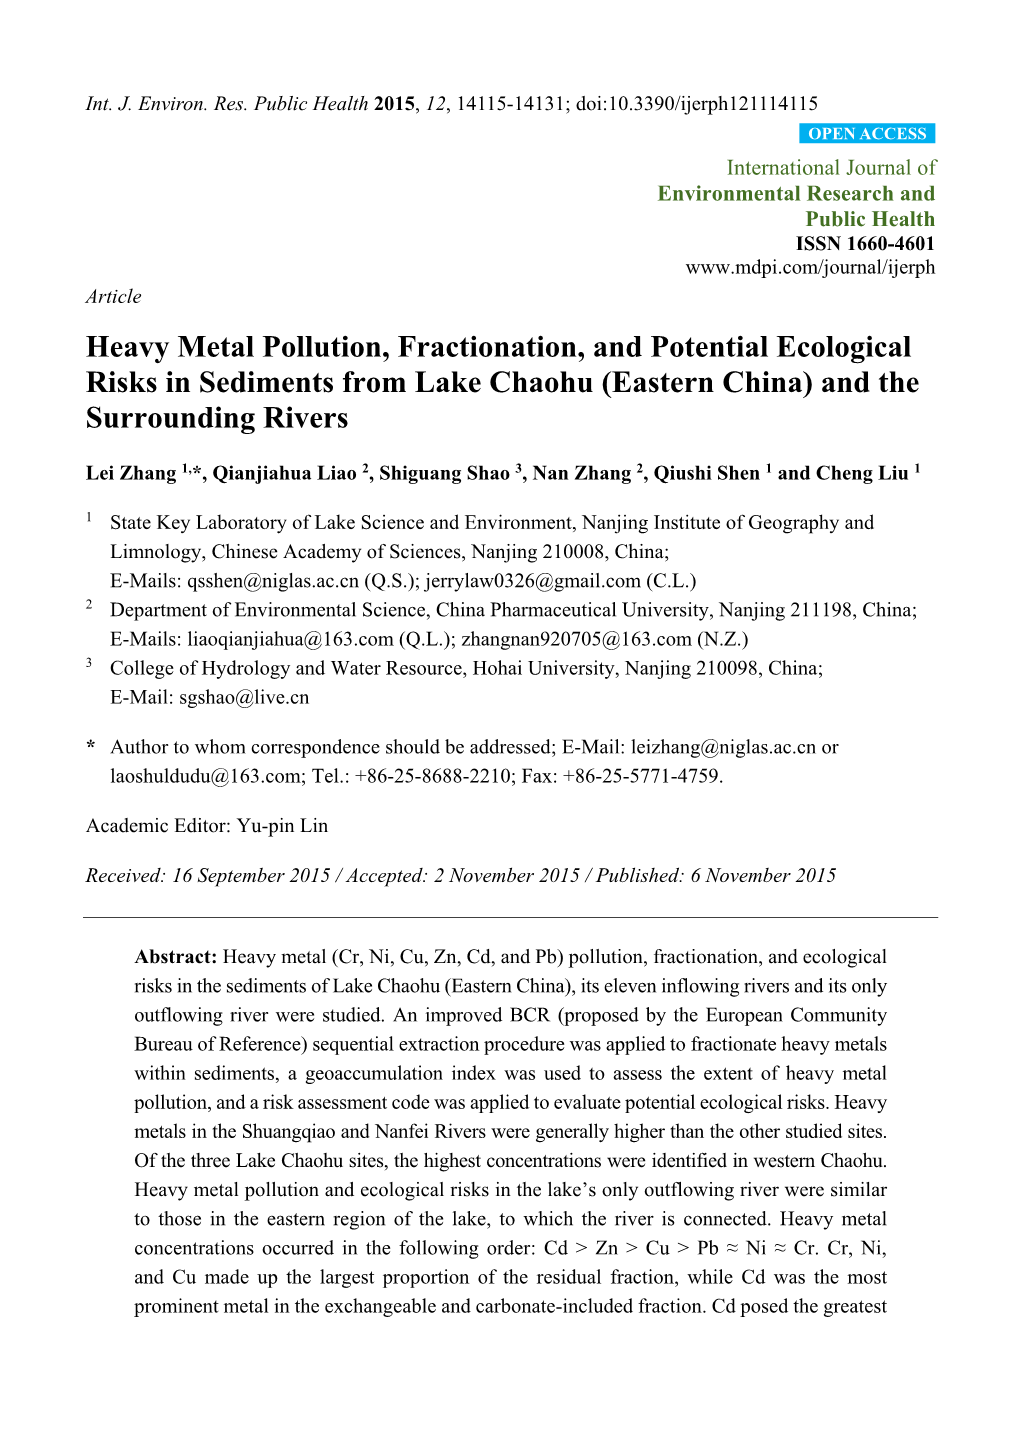 Heavy Metal Pollution, Fractionation, and Potential Ecological Risks in Sediments from Lake Chaohu (Eastern China) and the Surrounding Rivers